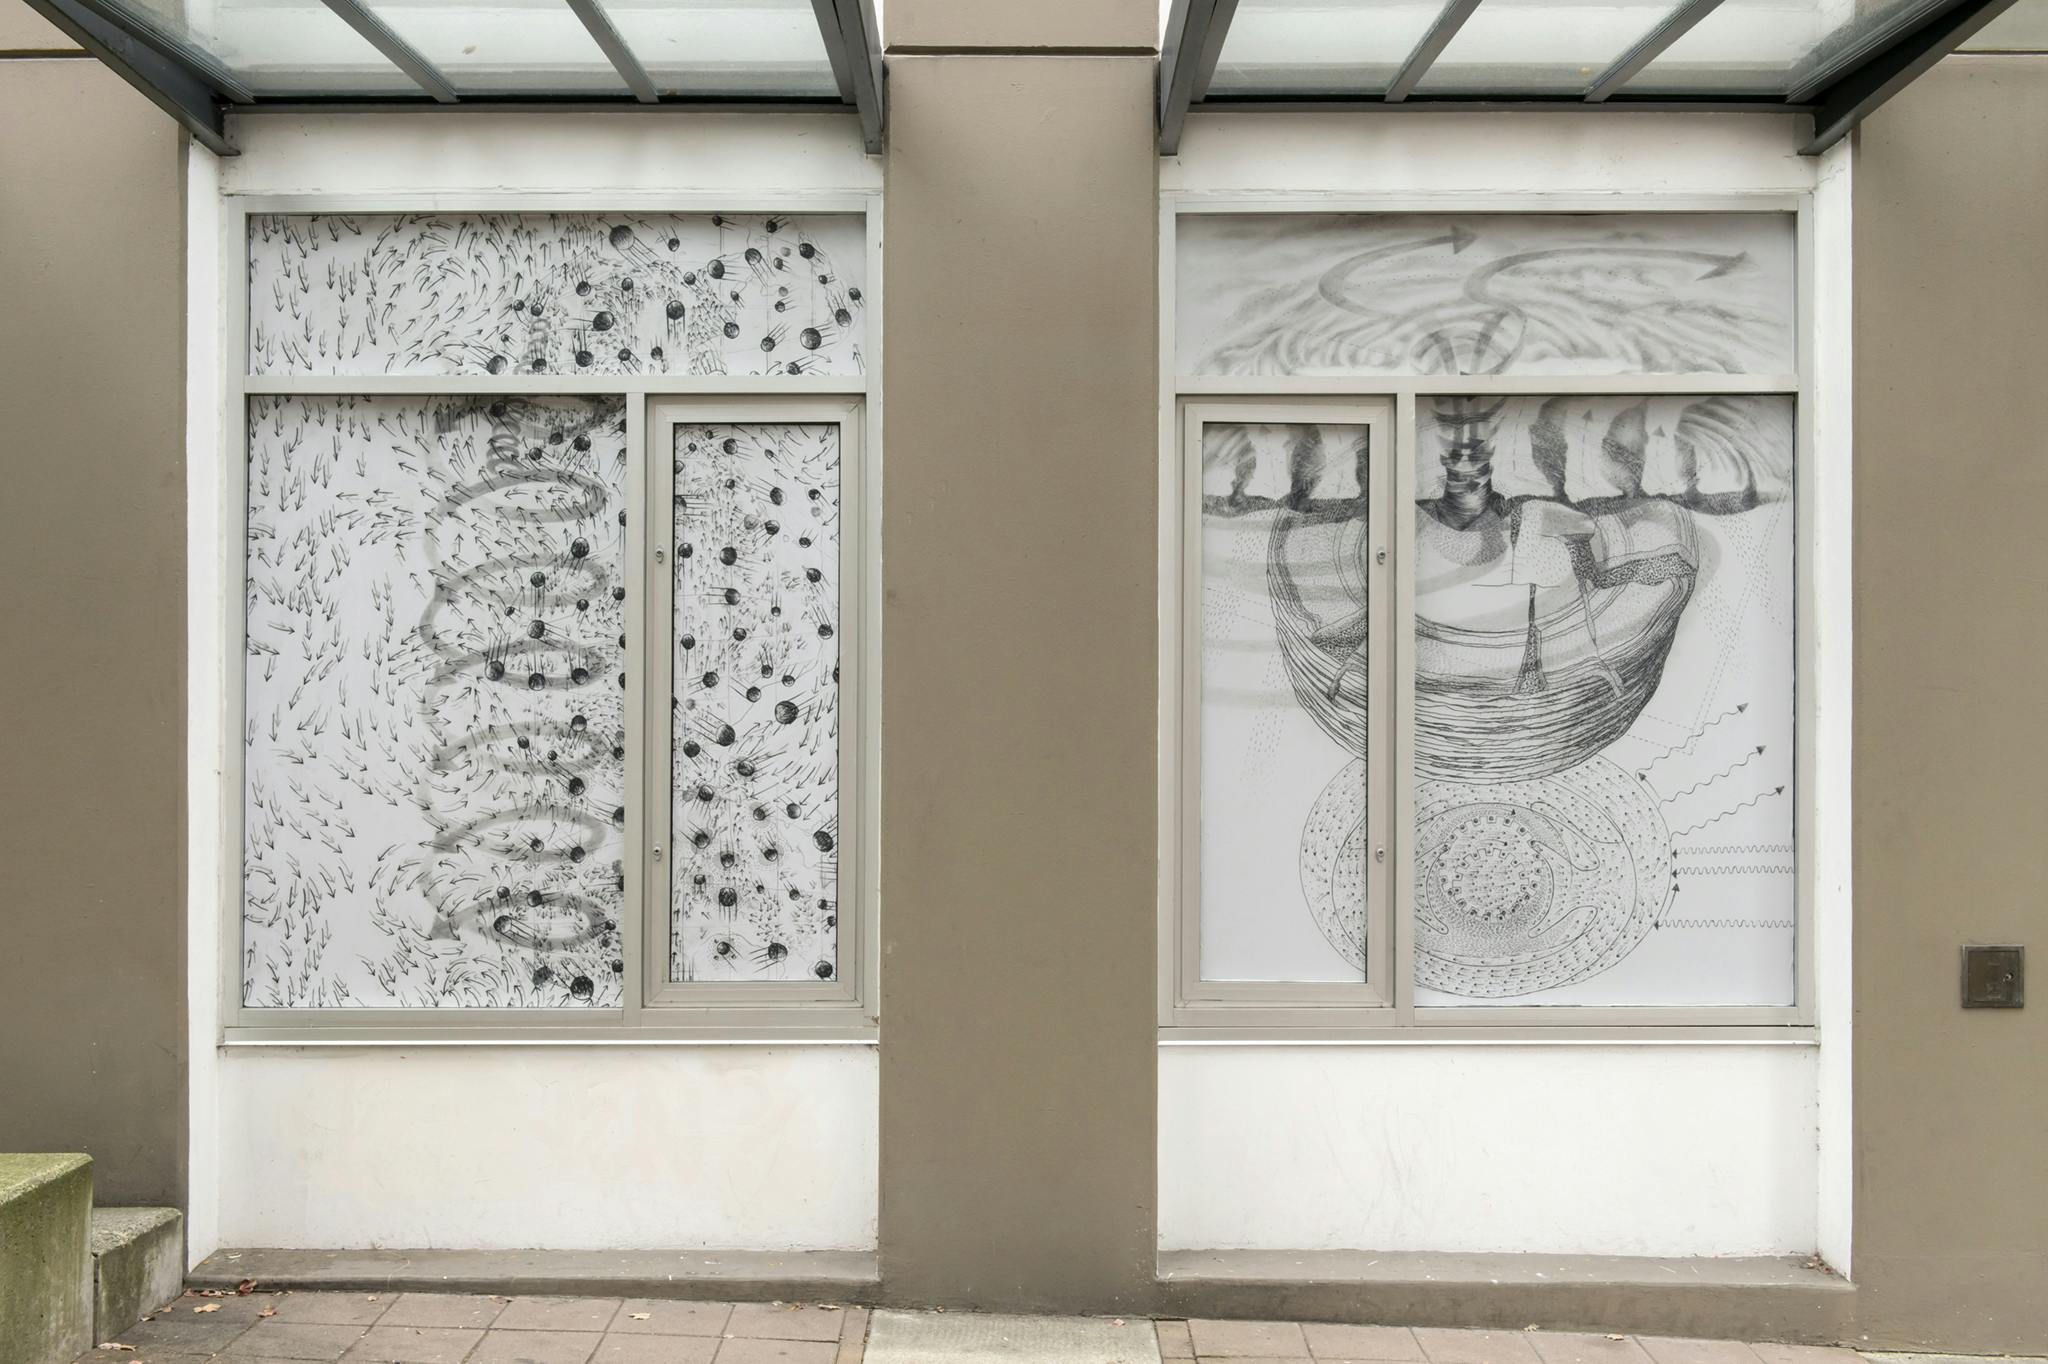 Image of two vinyl prints of black & white graphite drawings in two windows. The left has dynamic swirls of arrows and circles and the right has a stack of plates converging with a cloud-like shape.  